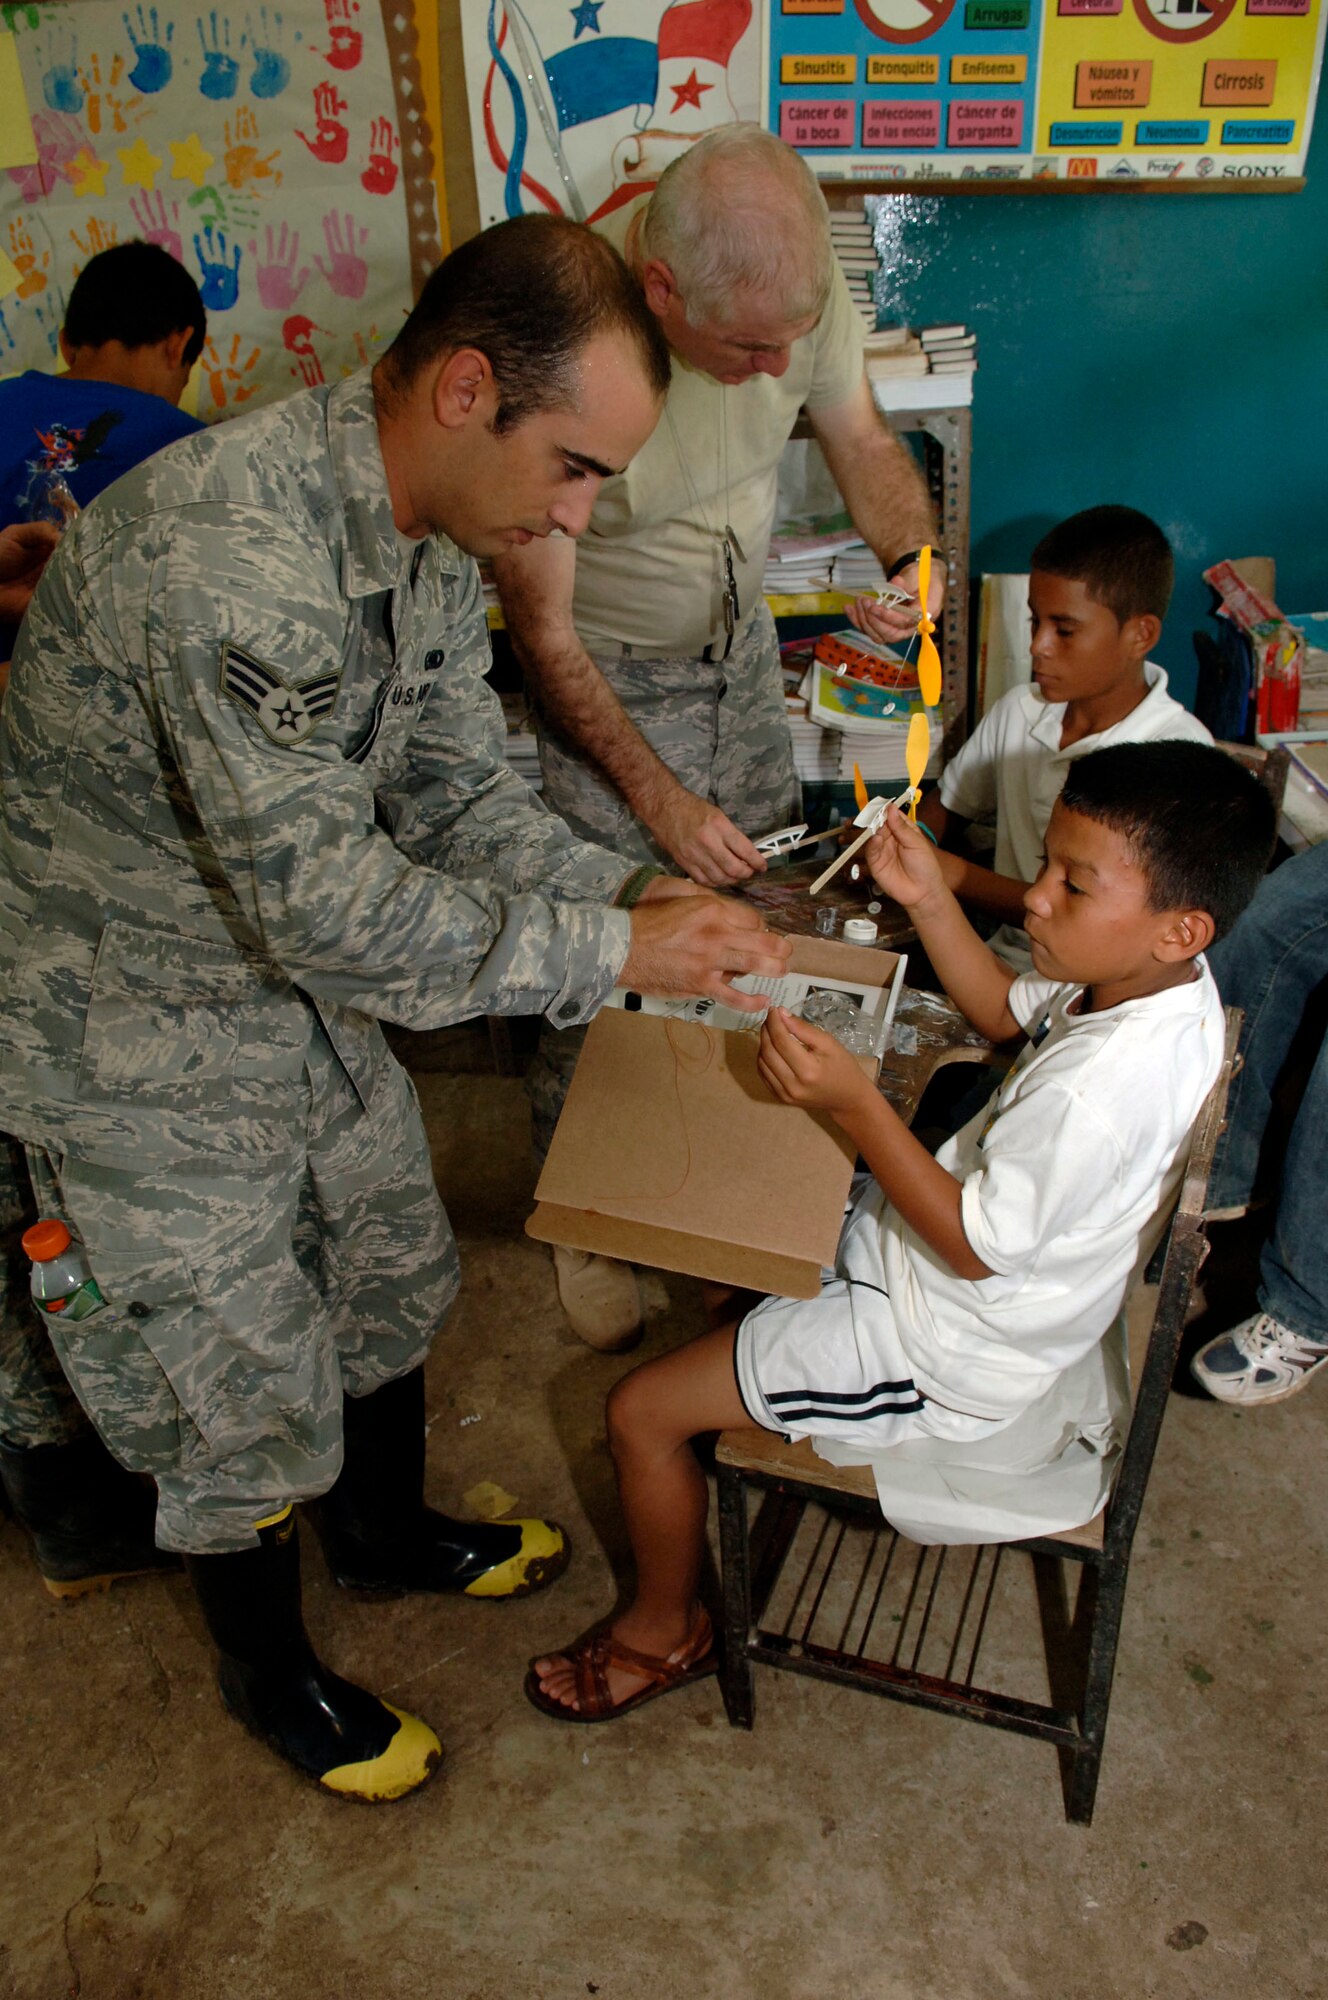 Senior Airman Alex James (left) and Maj. (Chaplain) Norris Burkes, 820th Expeditionary RED HORSE Squadron, help children assemble rubber band airplanes at the Sansonsito School July 12. (U.S. Air Force photo/Tech. Sgt. Eric Petosky)